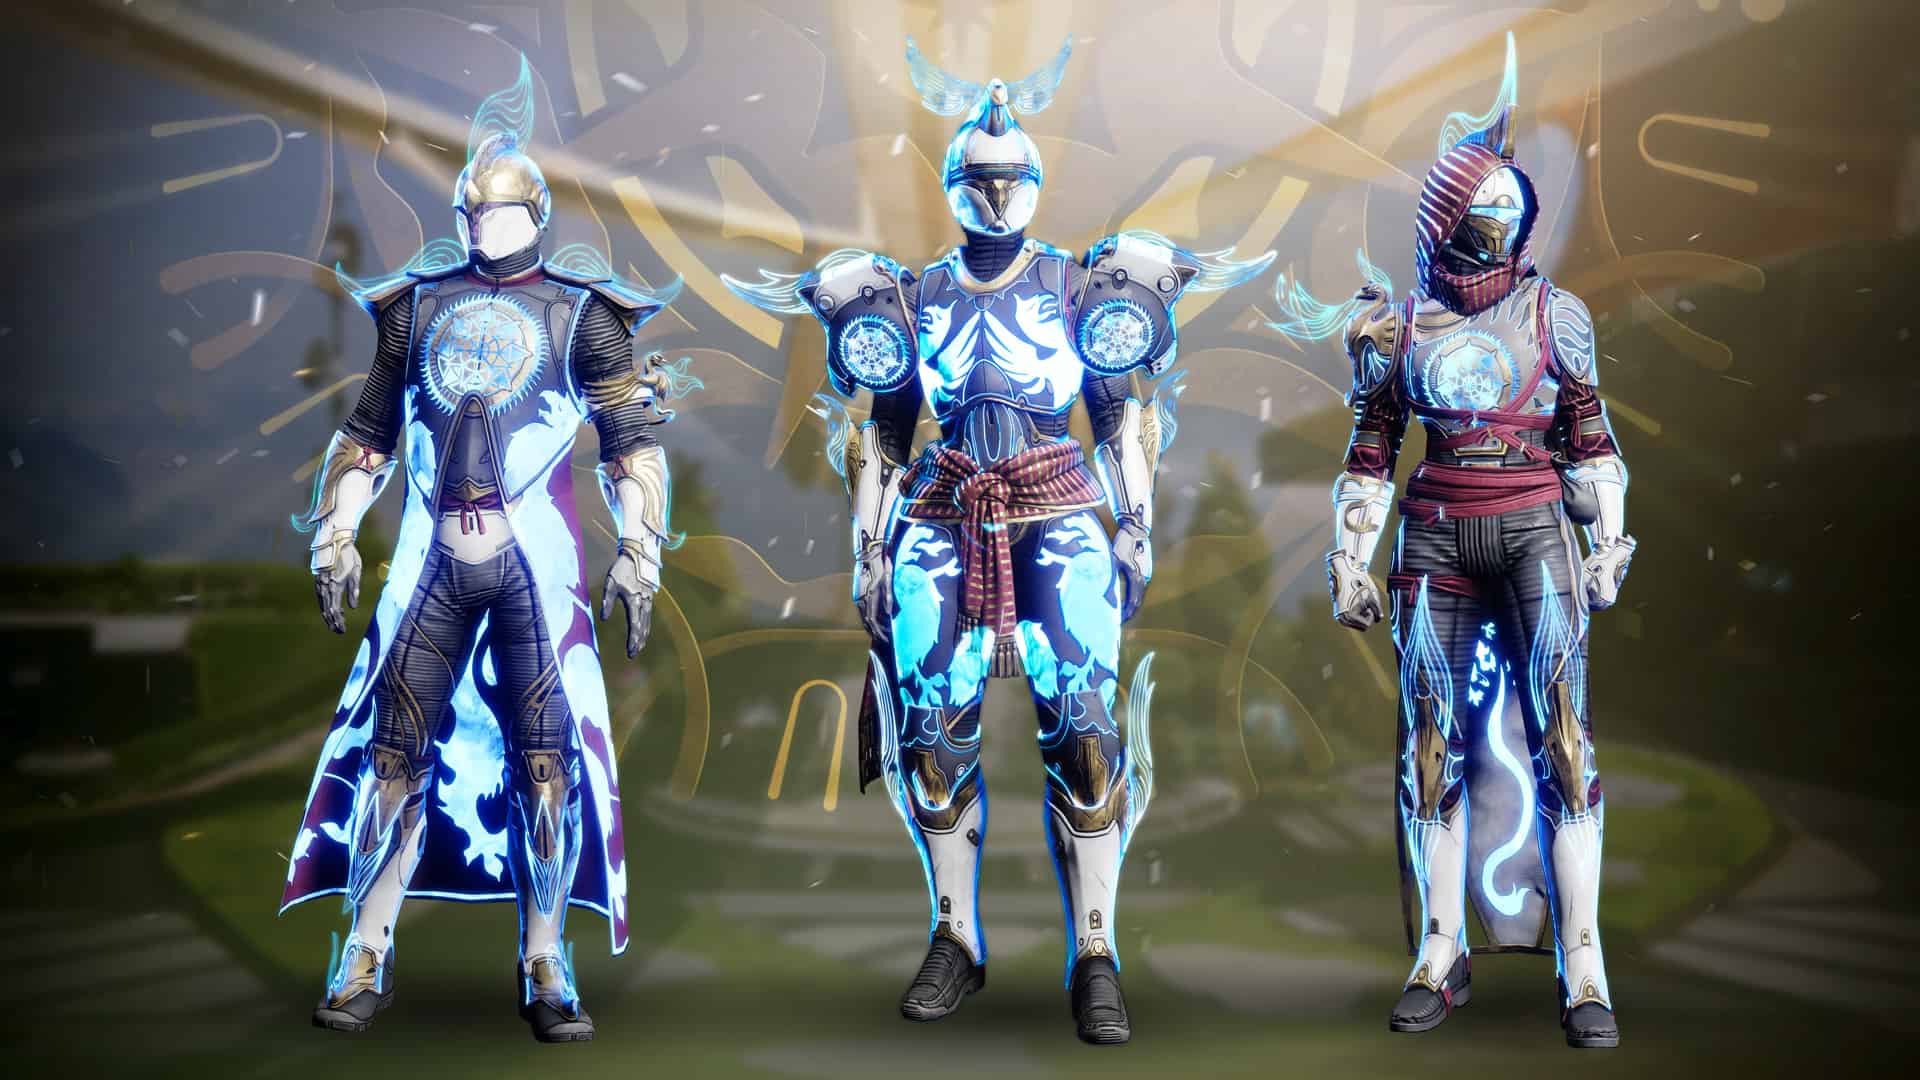 2022 Solstice armor sets featured